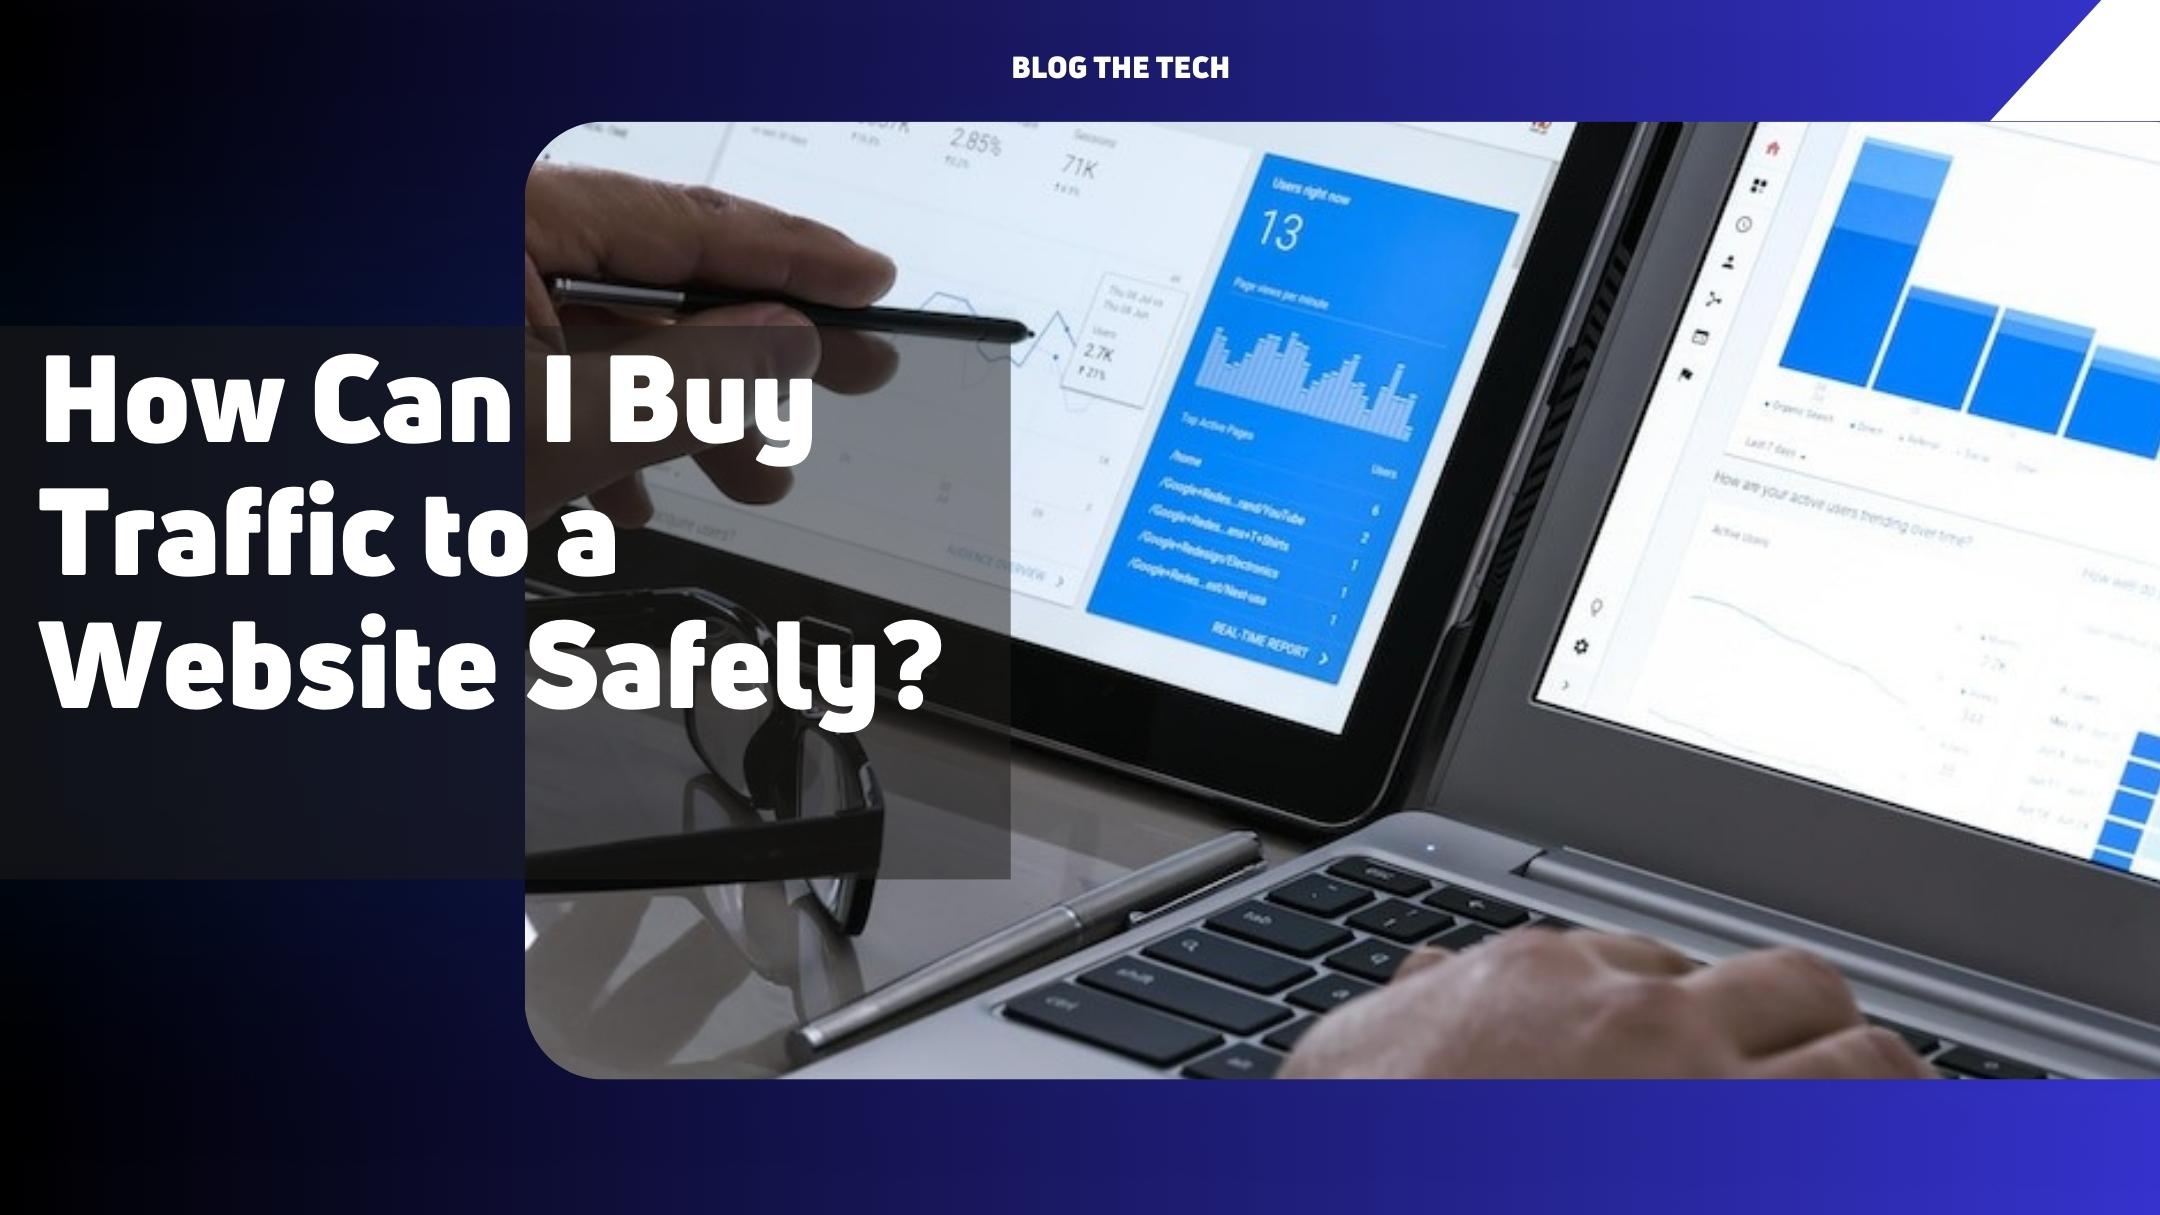 How Can I Buy Traffic to a Website Safely?